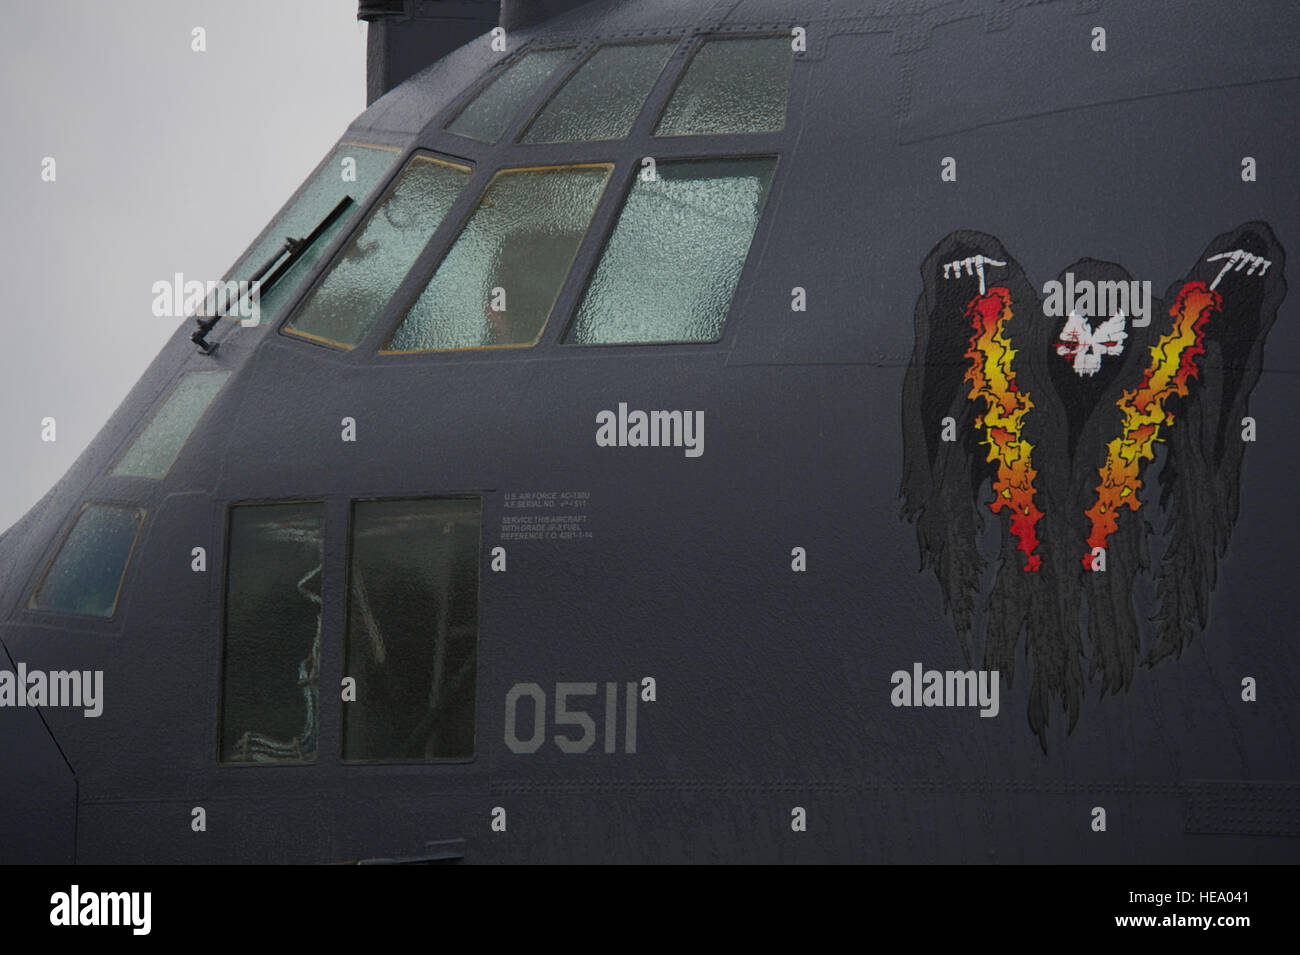 Ice coats the windshield of an AC-130U Spooky gunship at Hurlburt Field, Fla., Jan. 29, 2014. Freezing rain and plunging temperatures left the entire aircraft covered in a thin layer of ice. (U.S. Air Force Photo/ Staff Sgt. John Bainter) Stock Photo